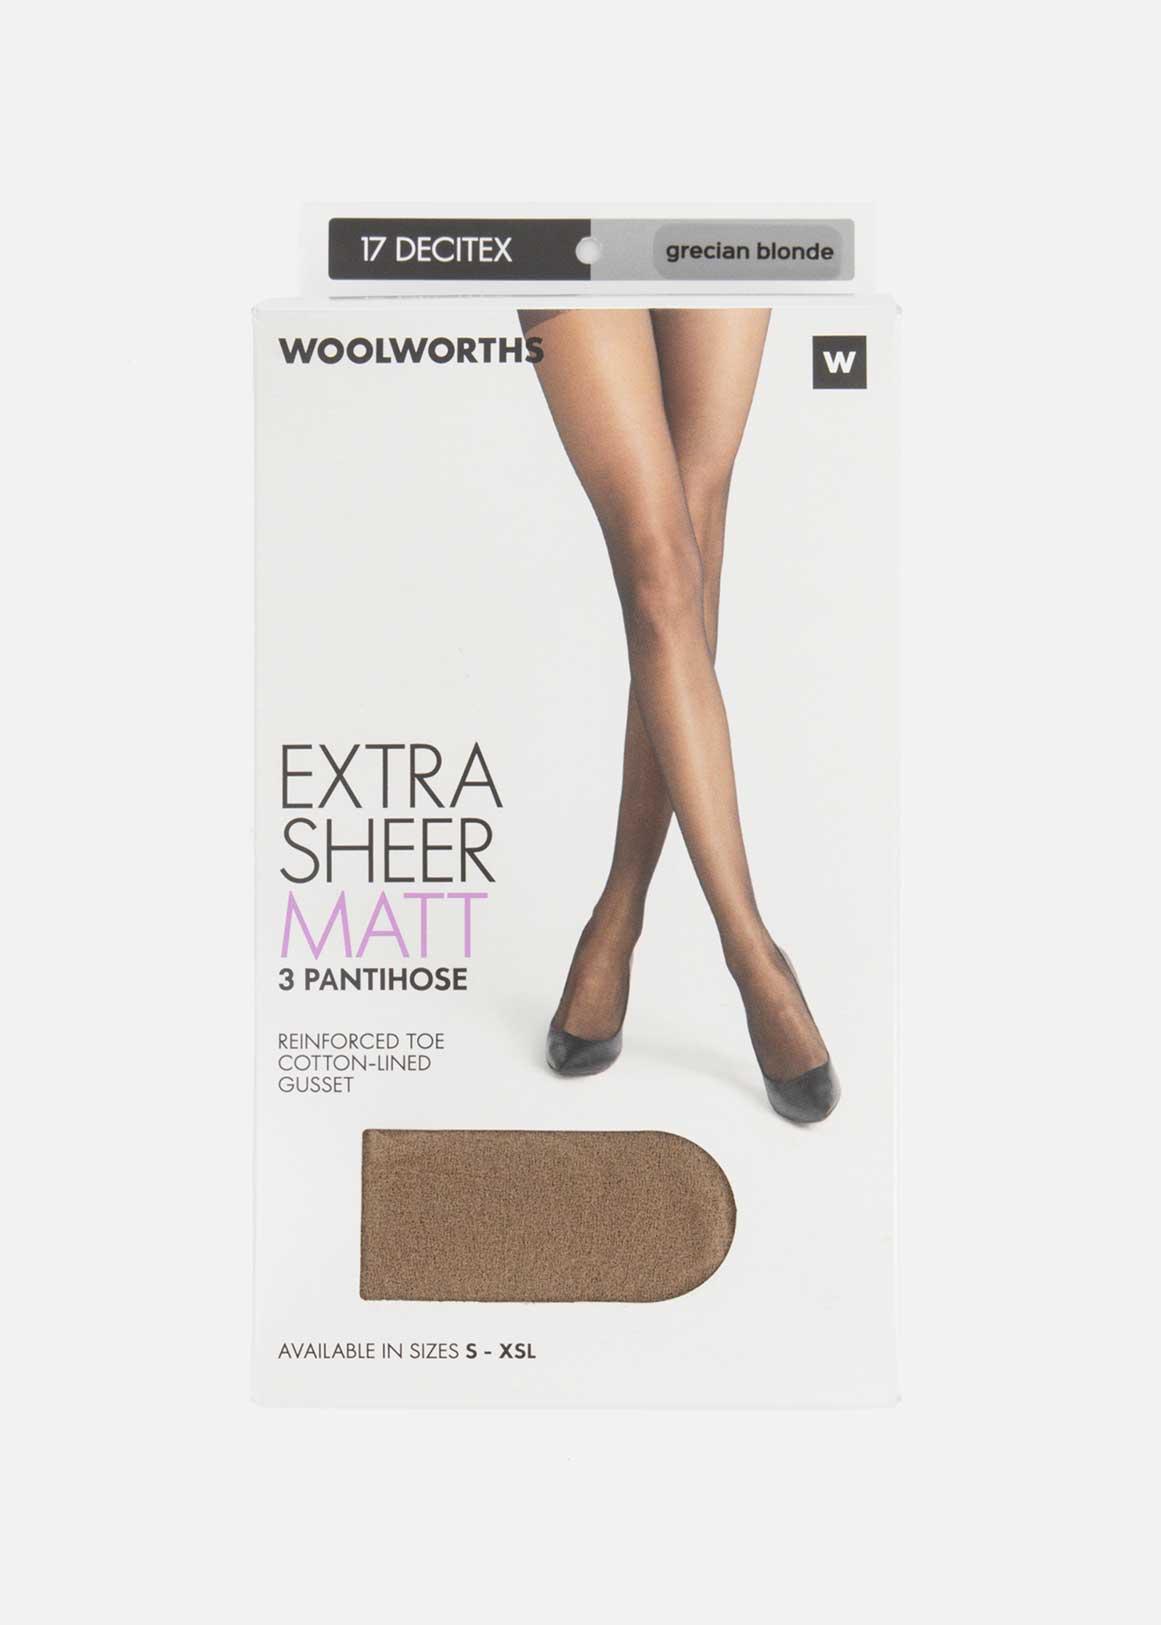 Sale celebration! 30% OFF CLiO Hosiery and Underwear at Woolworths